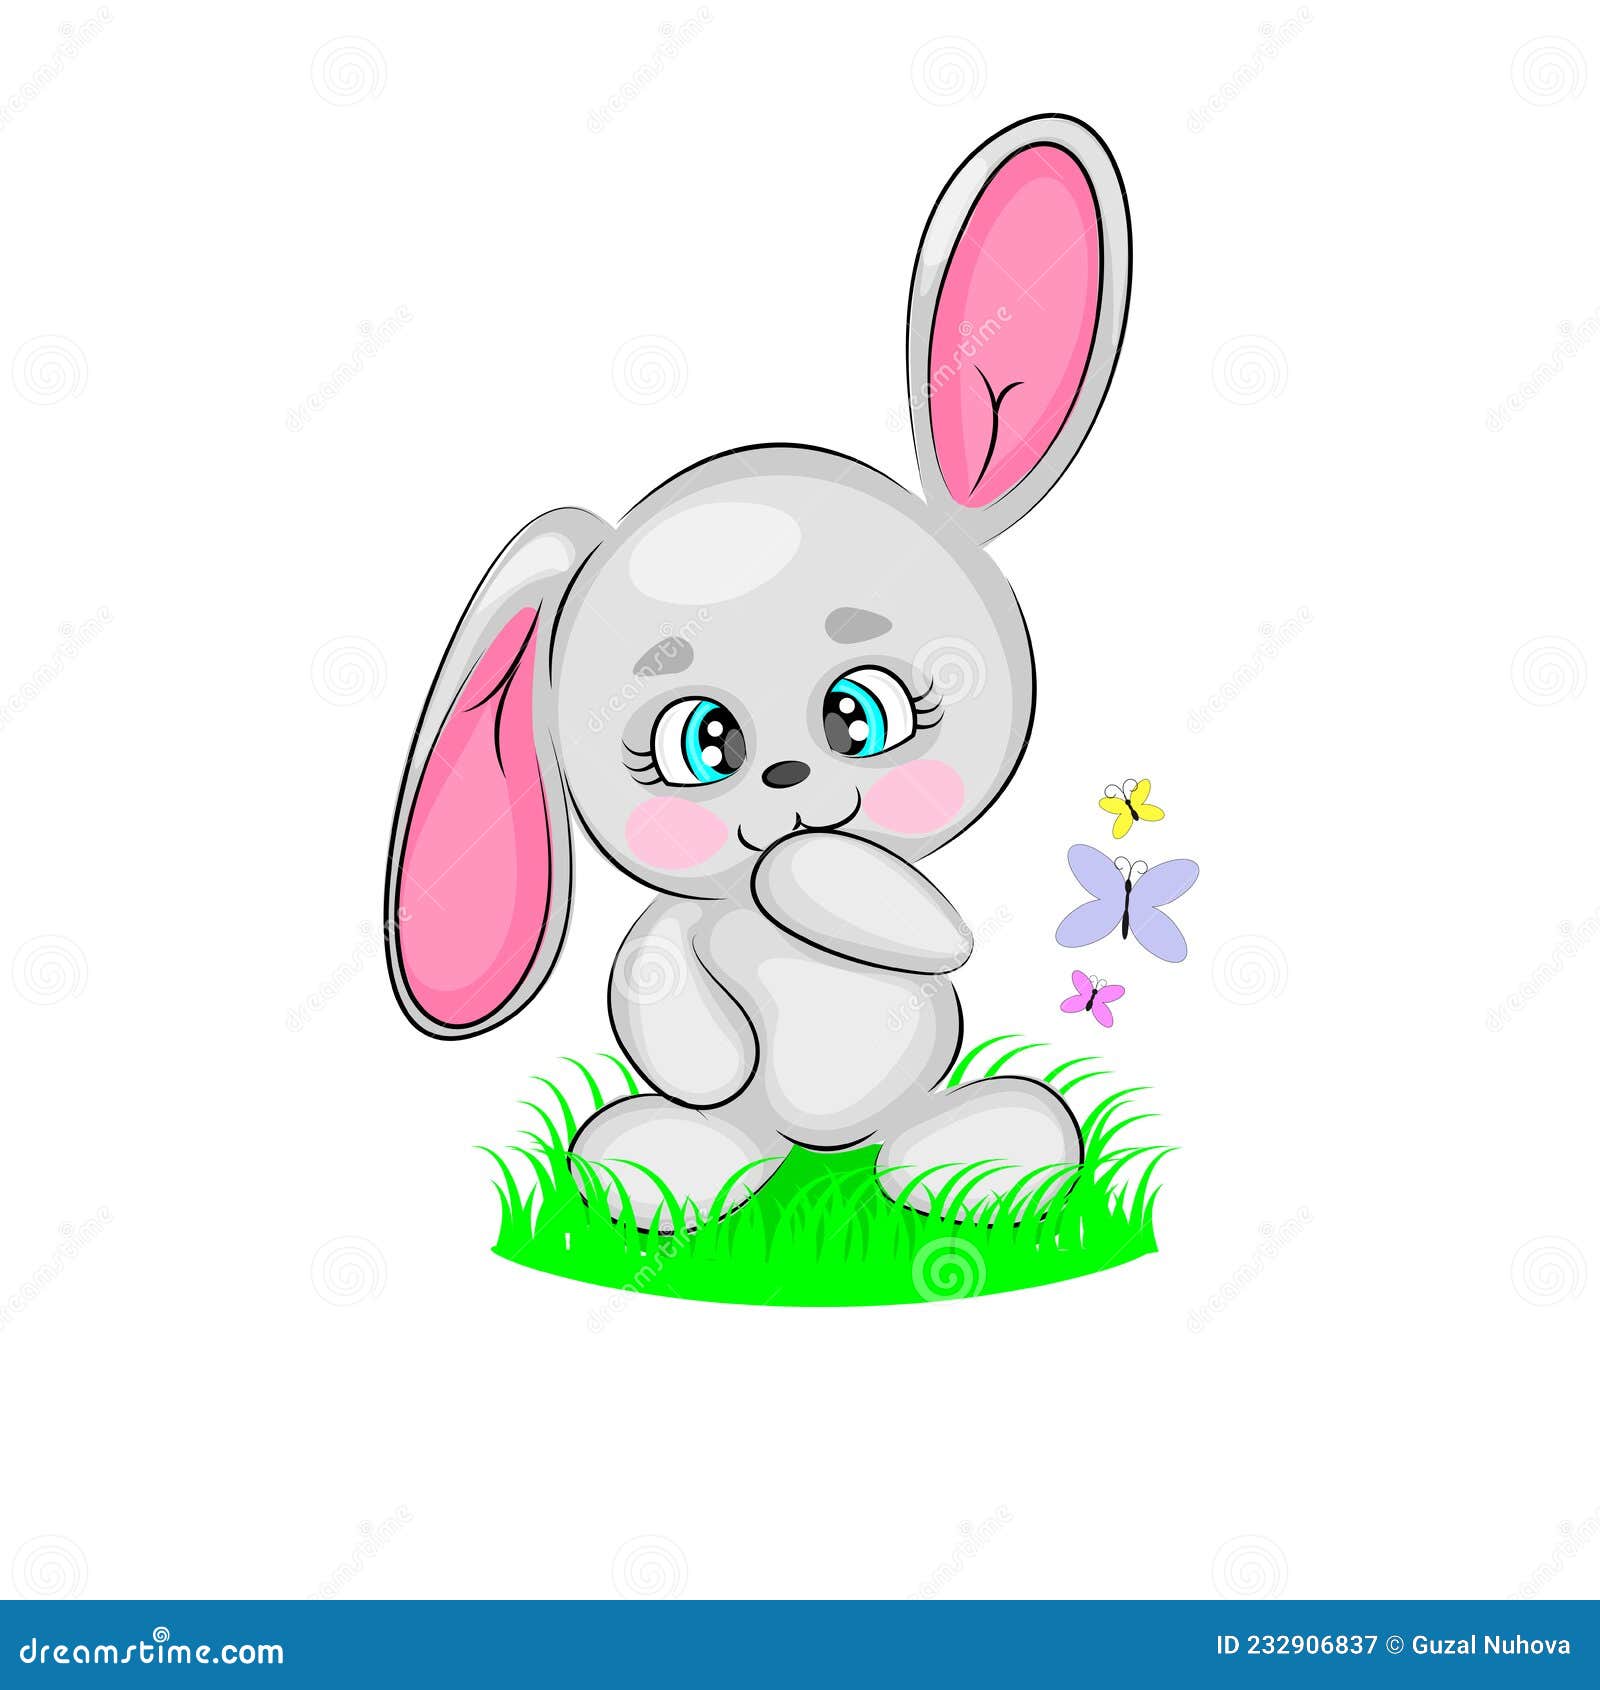 Cute Rabbit Illustration for Textile Wallpaper Decoration Product Packaging  Style Cartoon Stock Vector - Illustration of minimalism, trends: 232906837